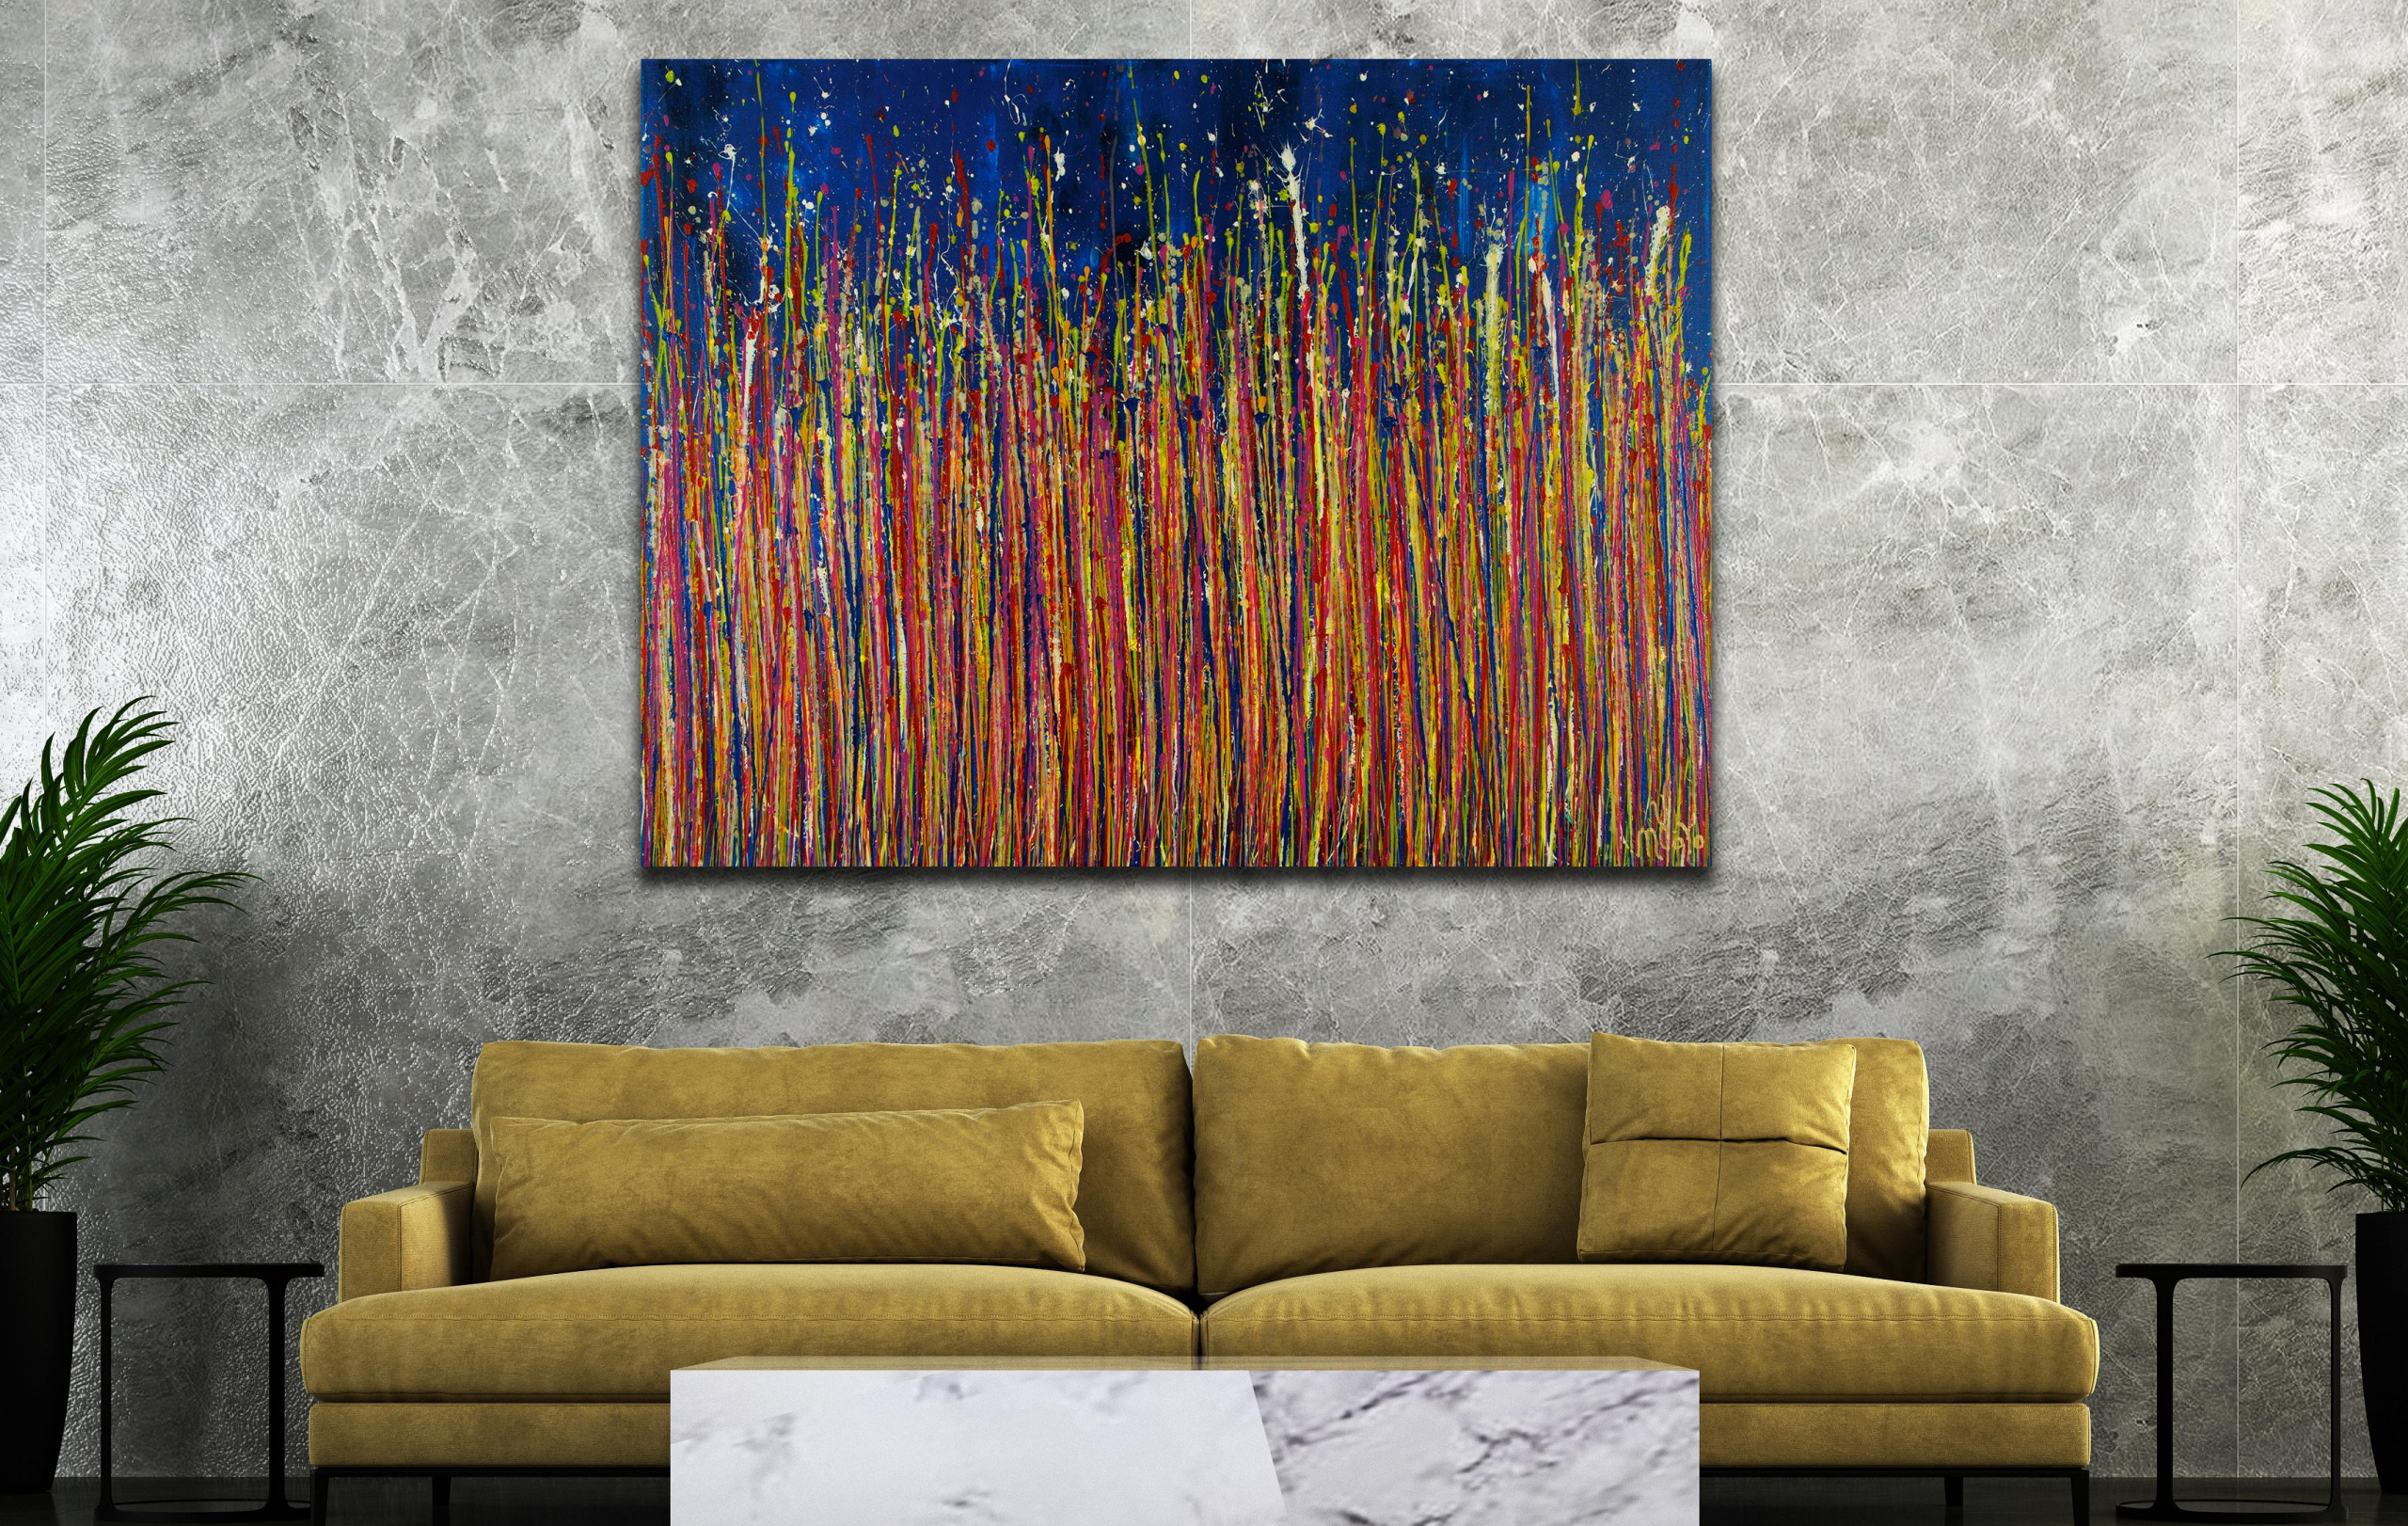 Strange Spectra 8 (Iridescent Blue) (2022) / 48 x 36 inches / ROOM VIEW